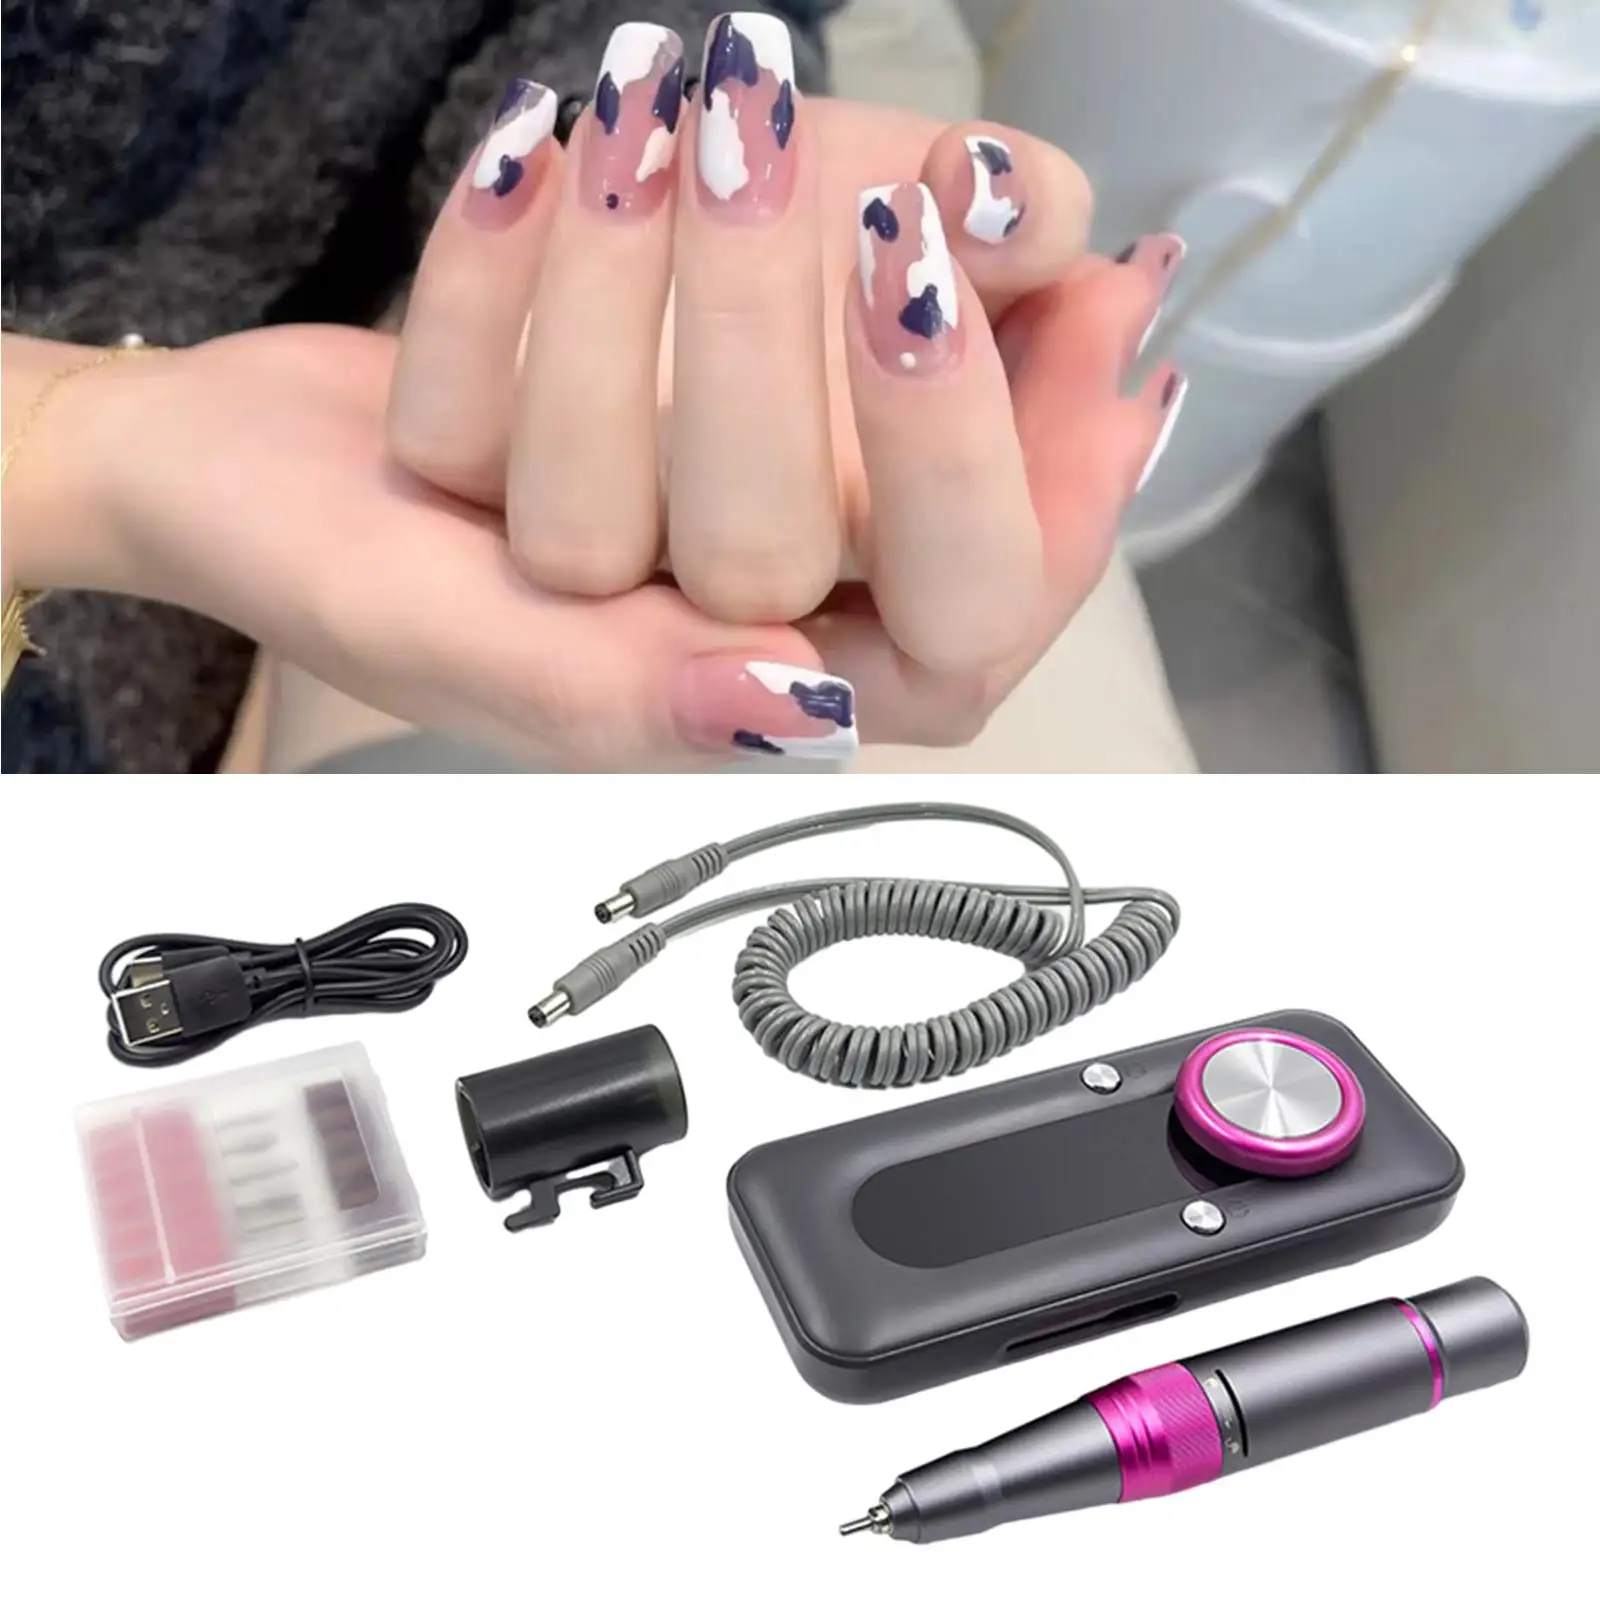 Electric Nail Drill Machine Portable Rechargeable Professional Nail File for Removing Acrylic Gel Nails Polish Home Salon Use